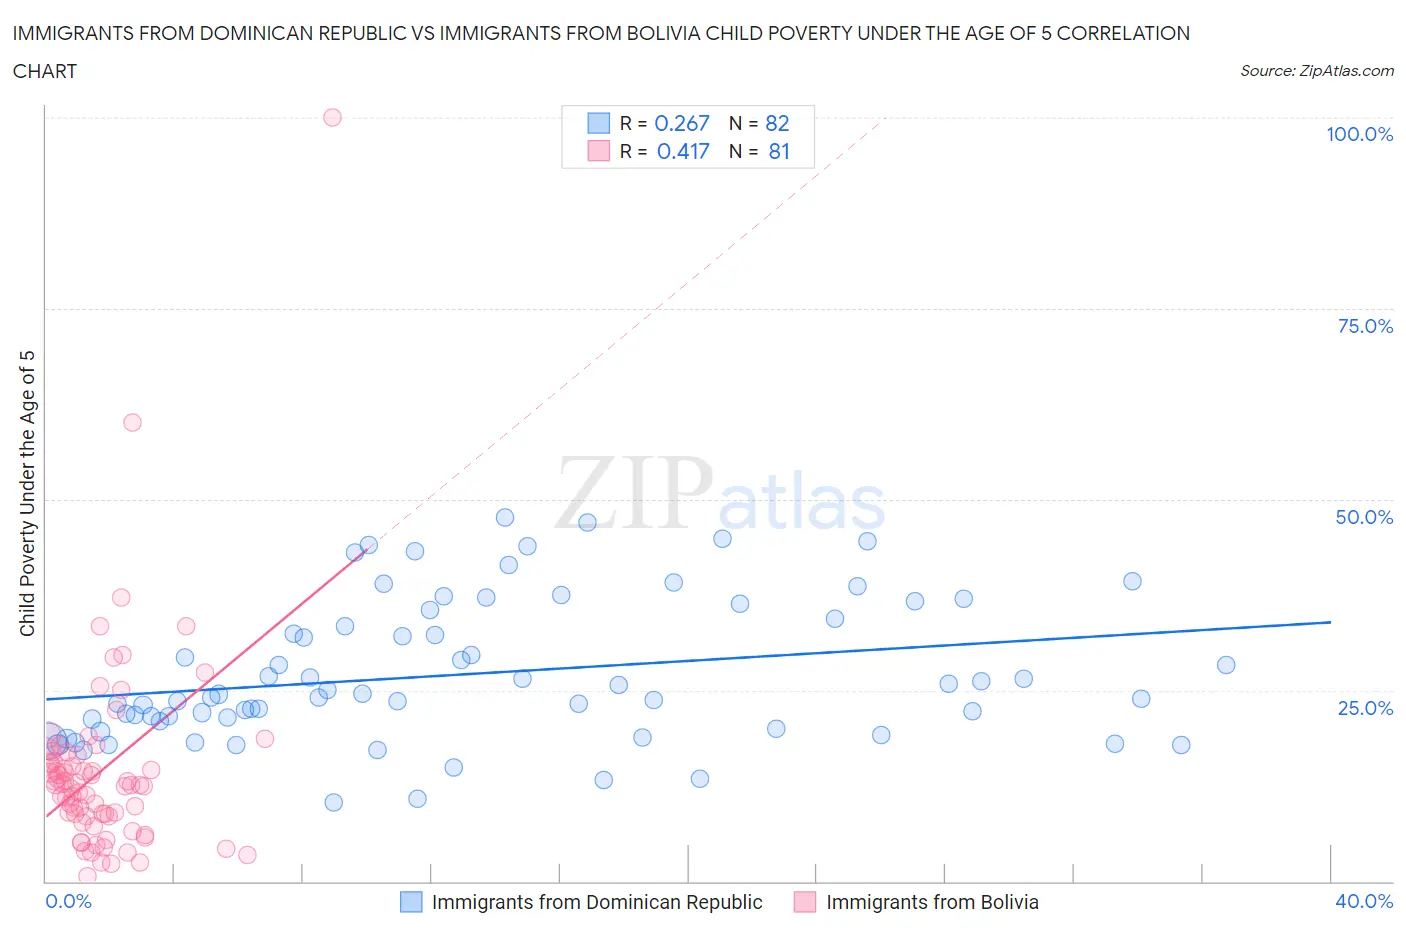 Immigrants from Dominican Republic vs Immigrants from Bolivia Child Poverty Under the Age of 5